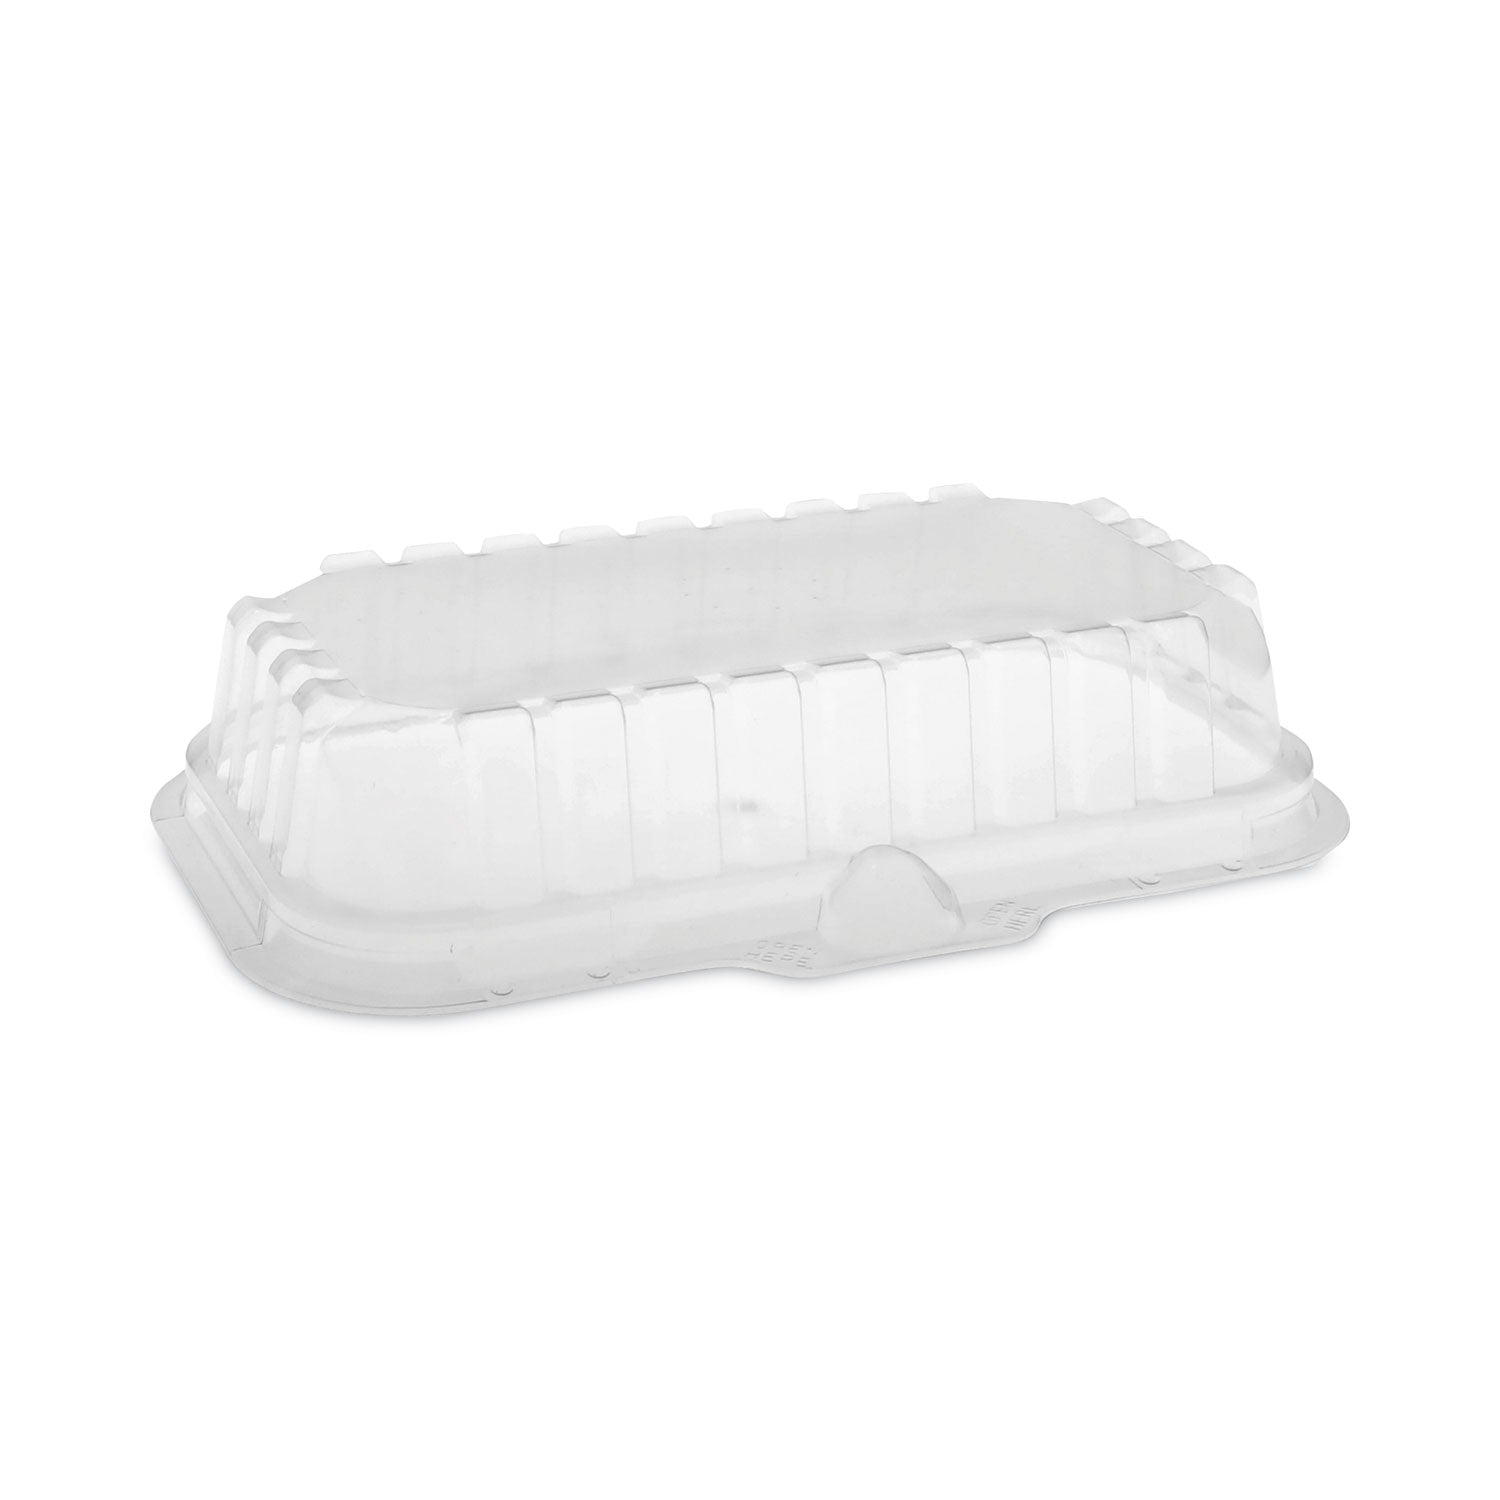 ops-dome-style-lid-17s-shallow-dome-83-x-48-x-15-clear-plastic-252-carton_pct0ci8s17s0000 - 1